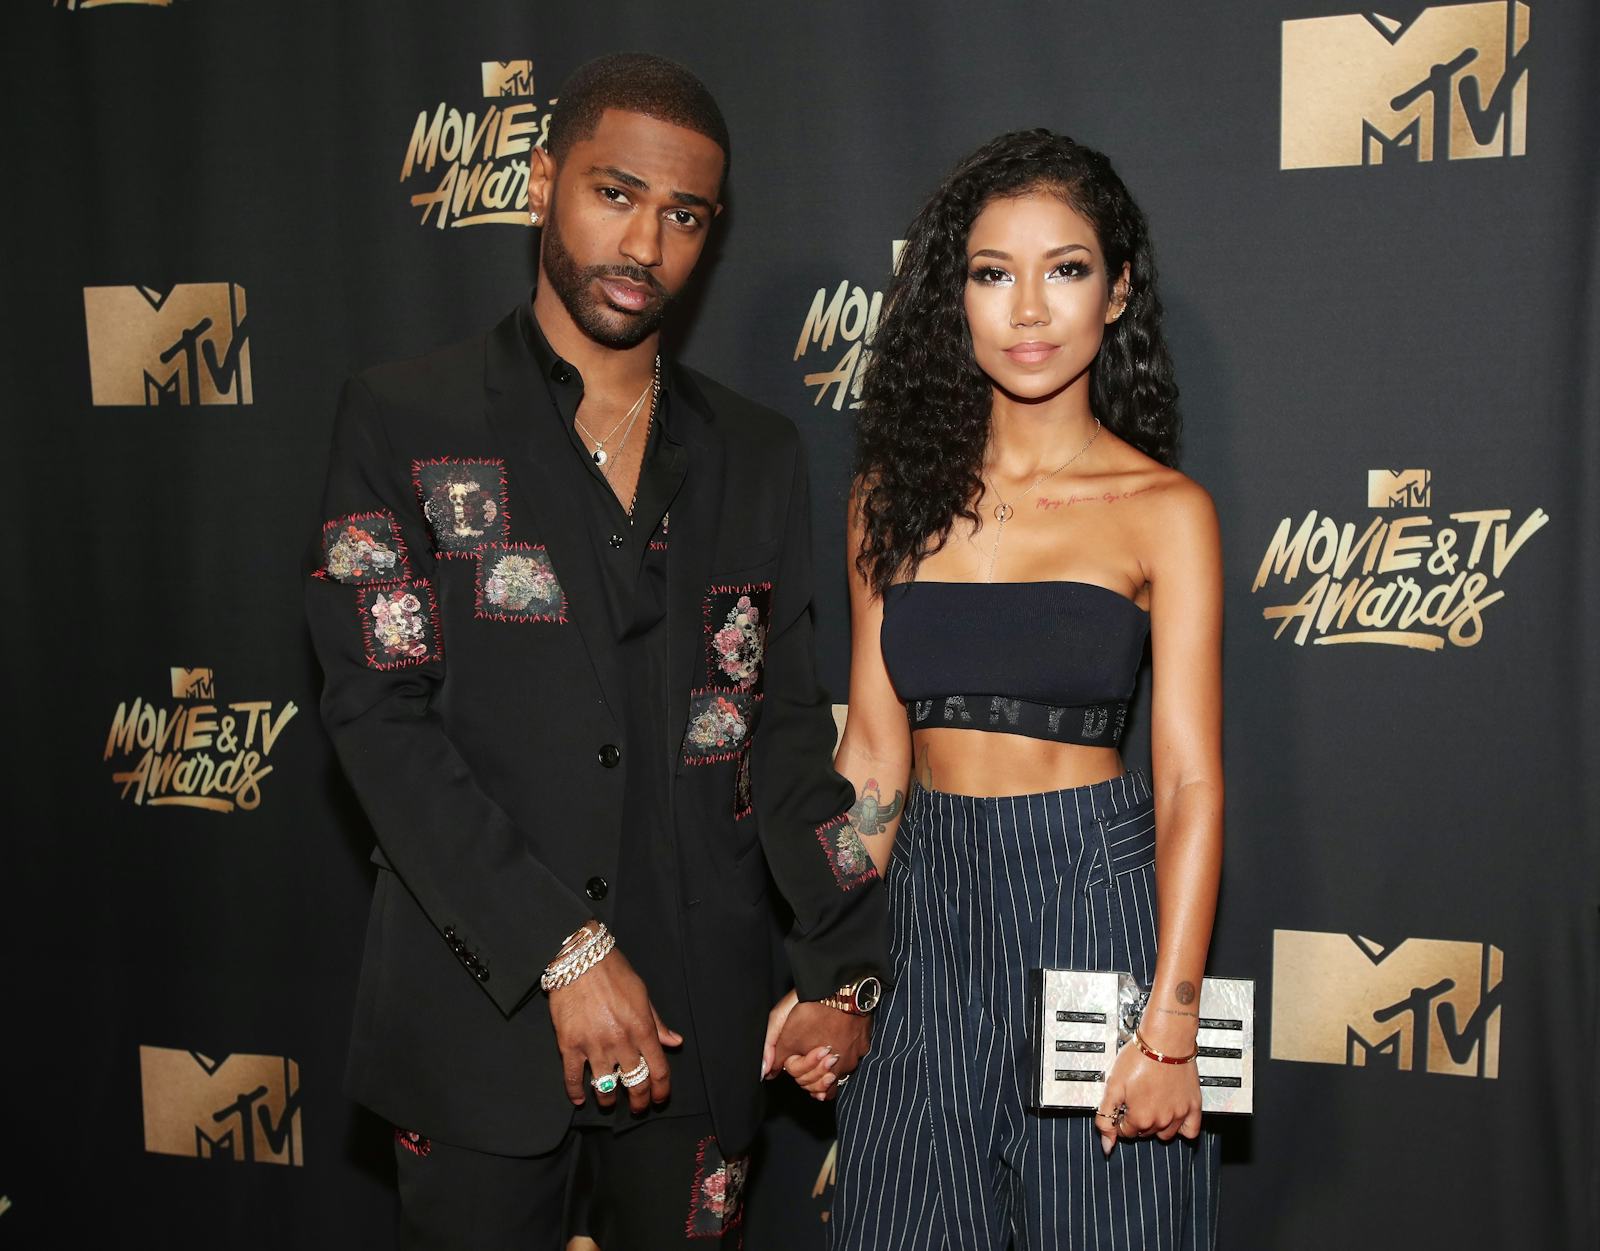 Big Sean & Jhene Aiko's "Single Again" Sheds Light On Why They Broke Up